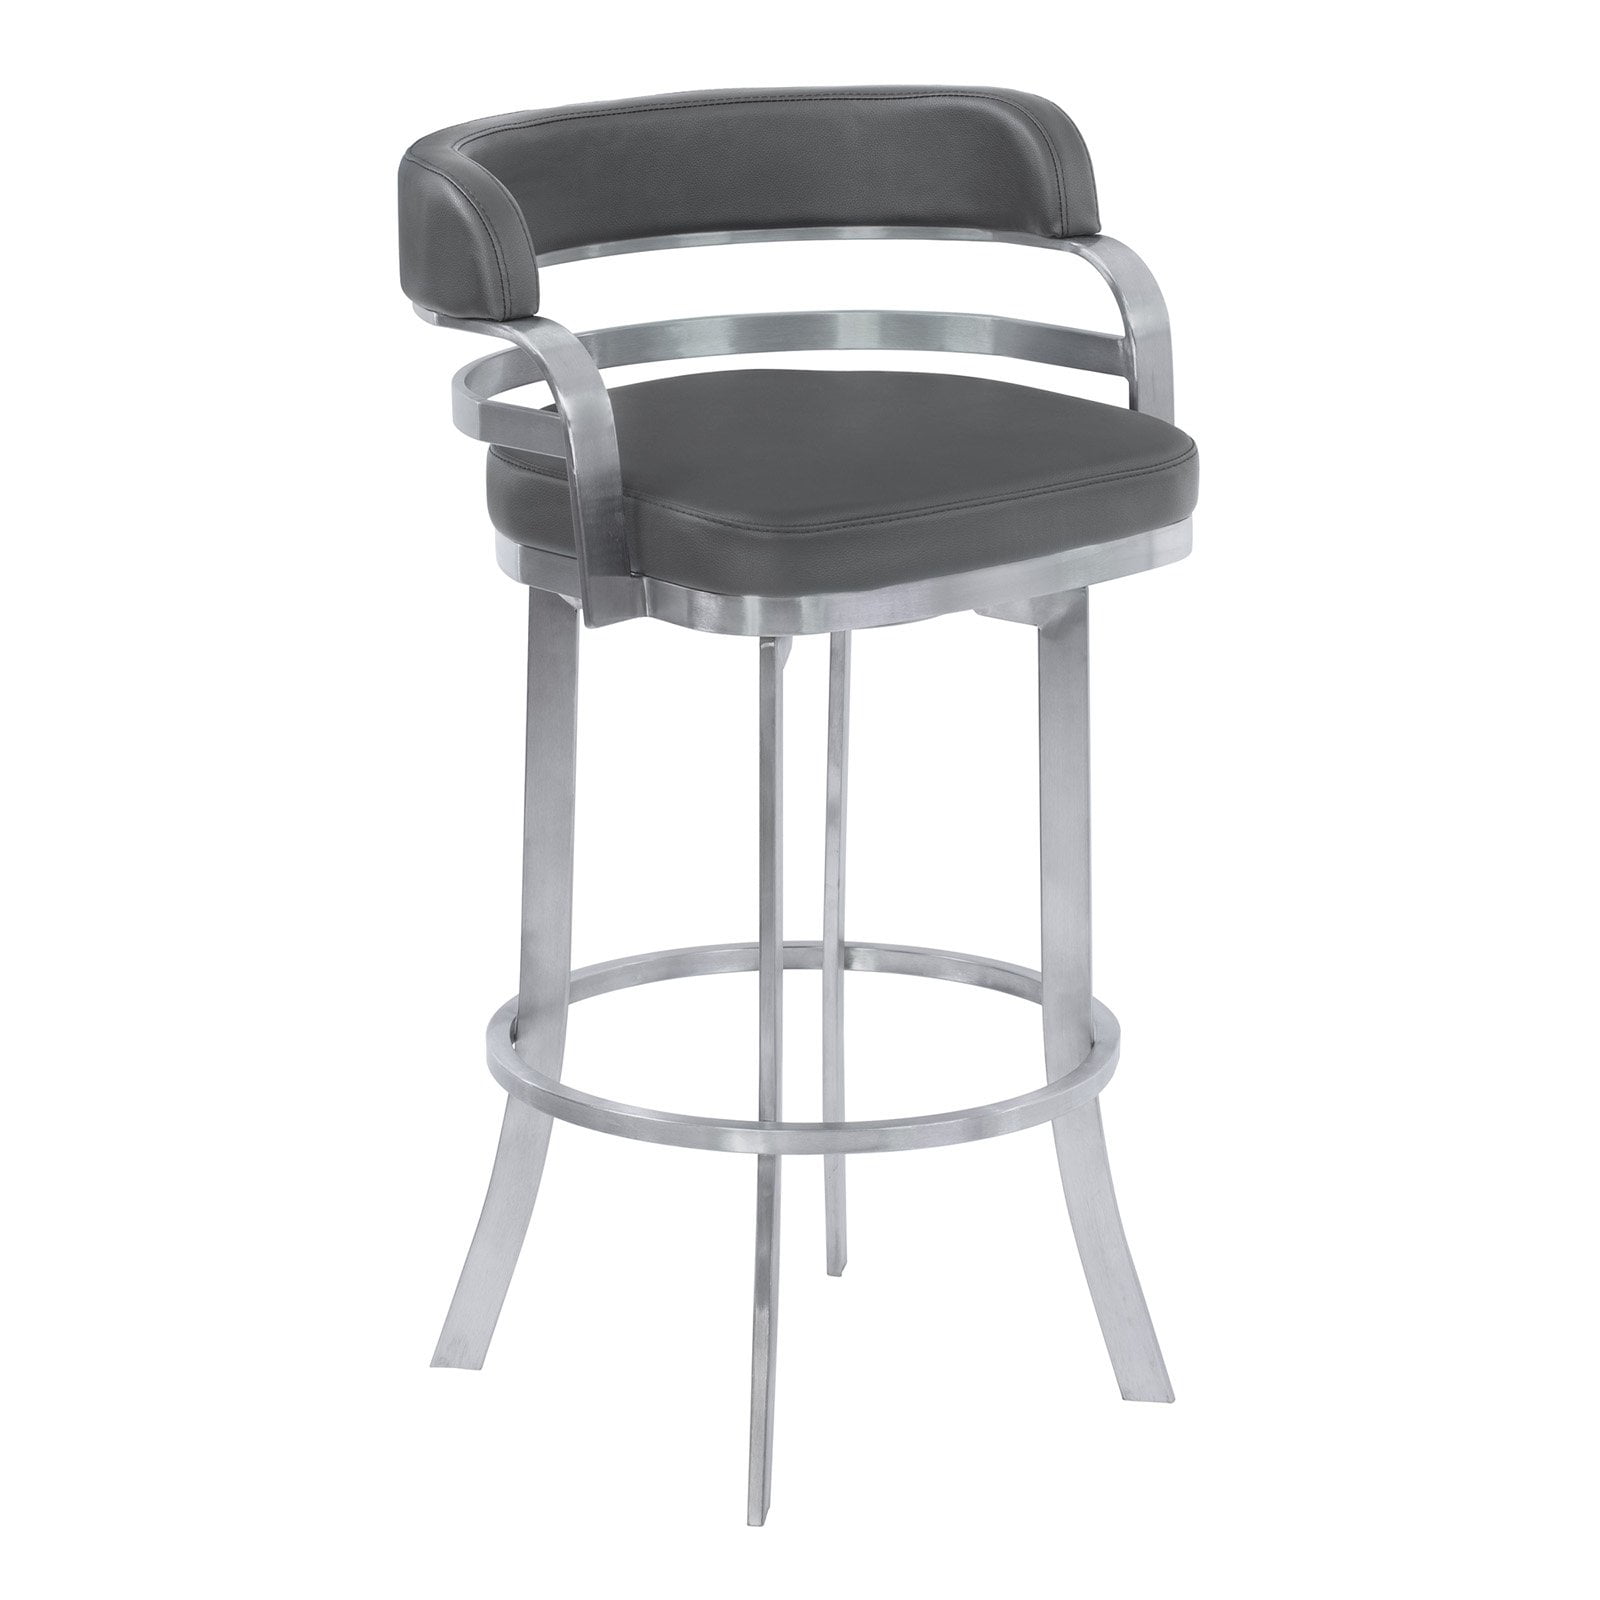 Picture of Armen Living LCPRBAGRBS30 43.54 x 23.62 x 23.62 in. 30 in. Prinz Bar Height Metal Swivel Barstool, Gray Faux Leather with Brushed Stainless Steel